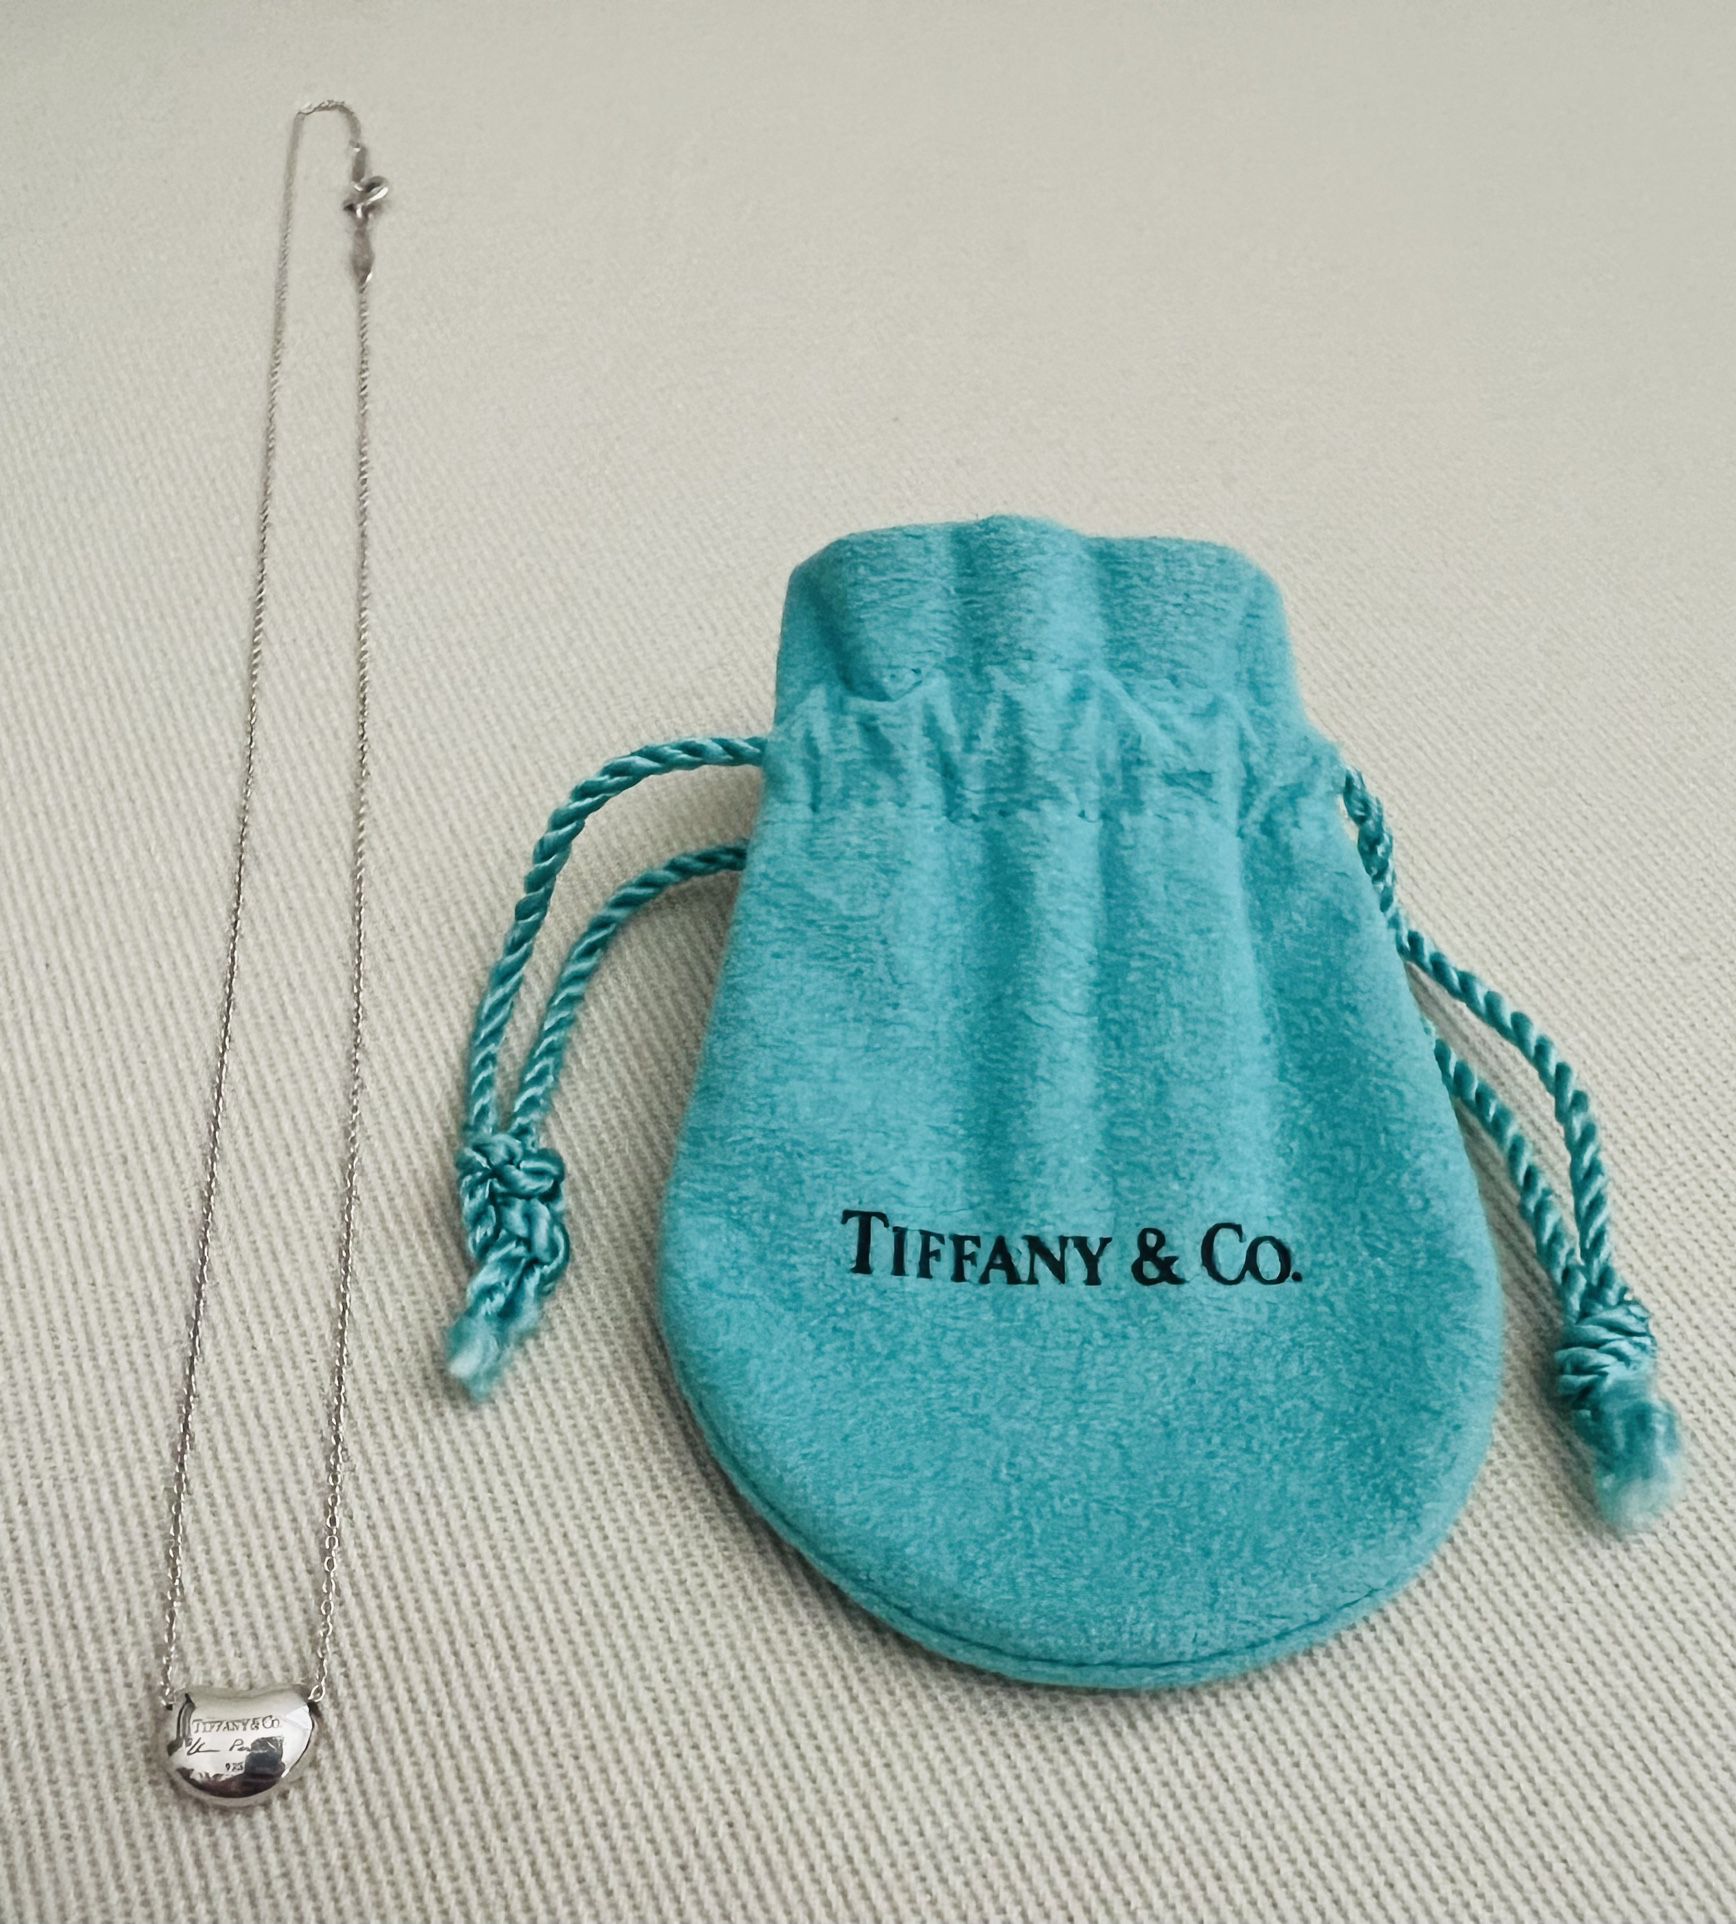 Tiffany & Co. Bean Pendant Necklace w/ Chain & Bag for $175